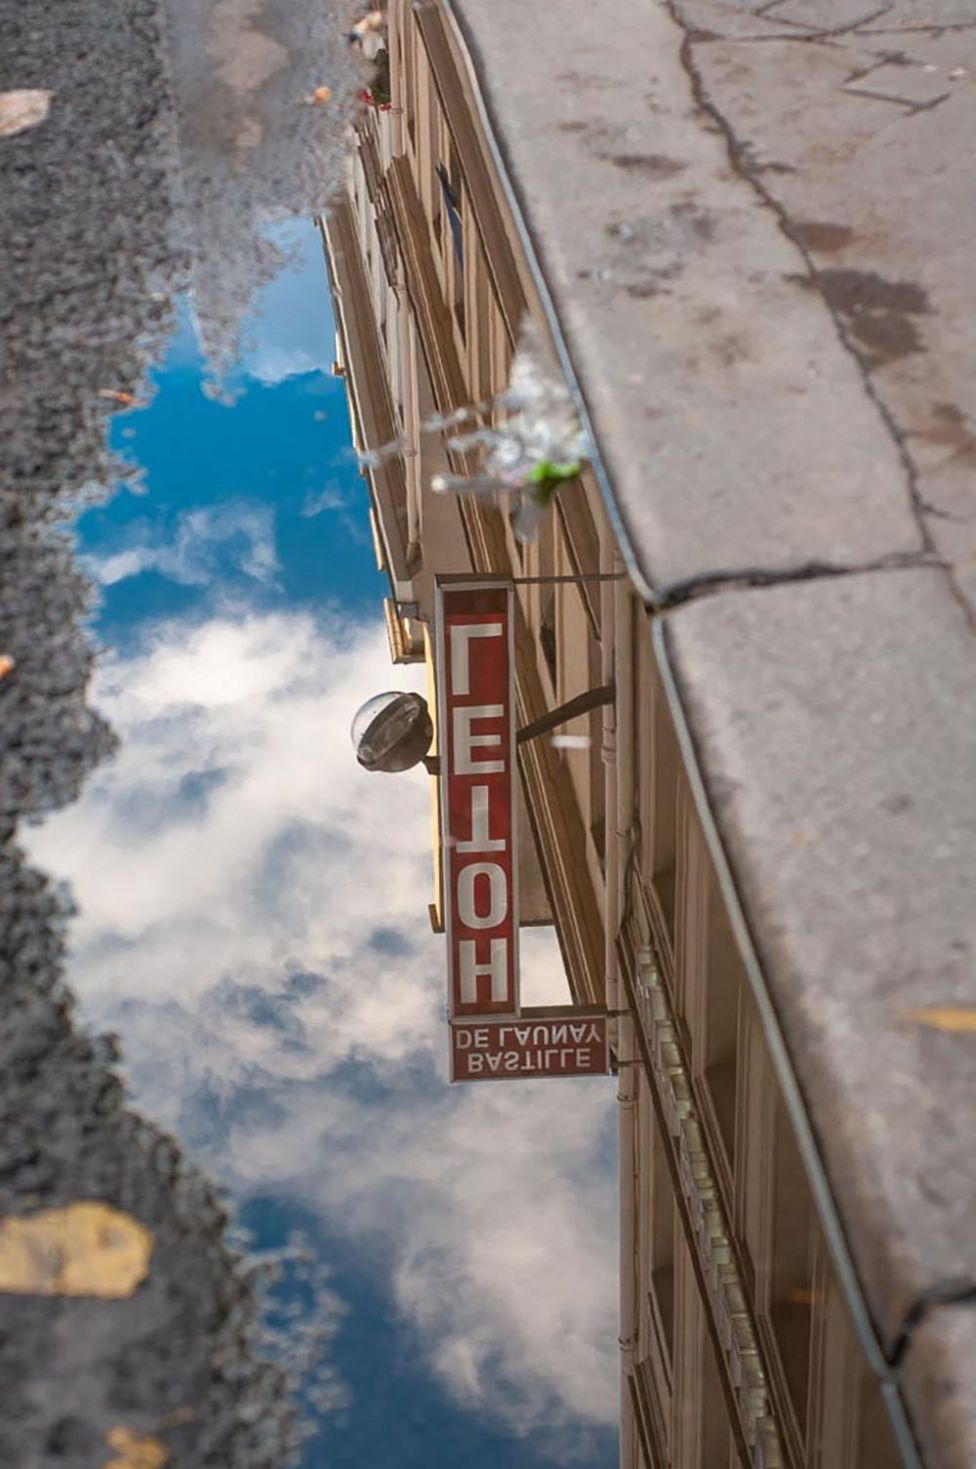 Hotel sign reflected in a puddle